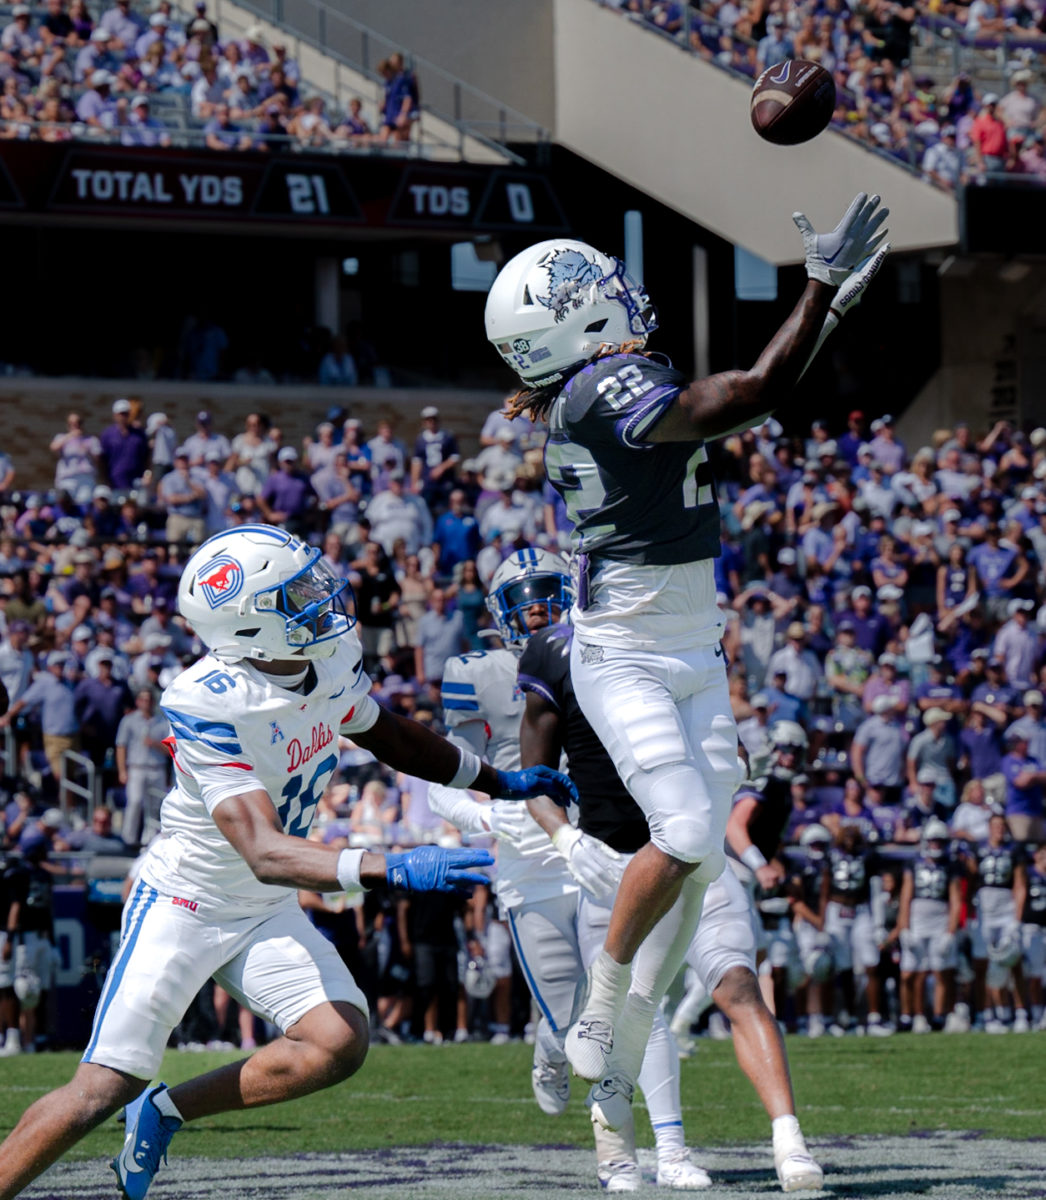 Texas Christian University wide-receiver Major Everhart receives a pass at Amon G. Carter Stadium in Fort Worth, Texas, Sept. 23, 2023.